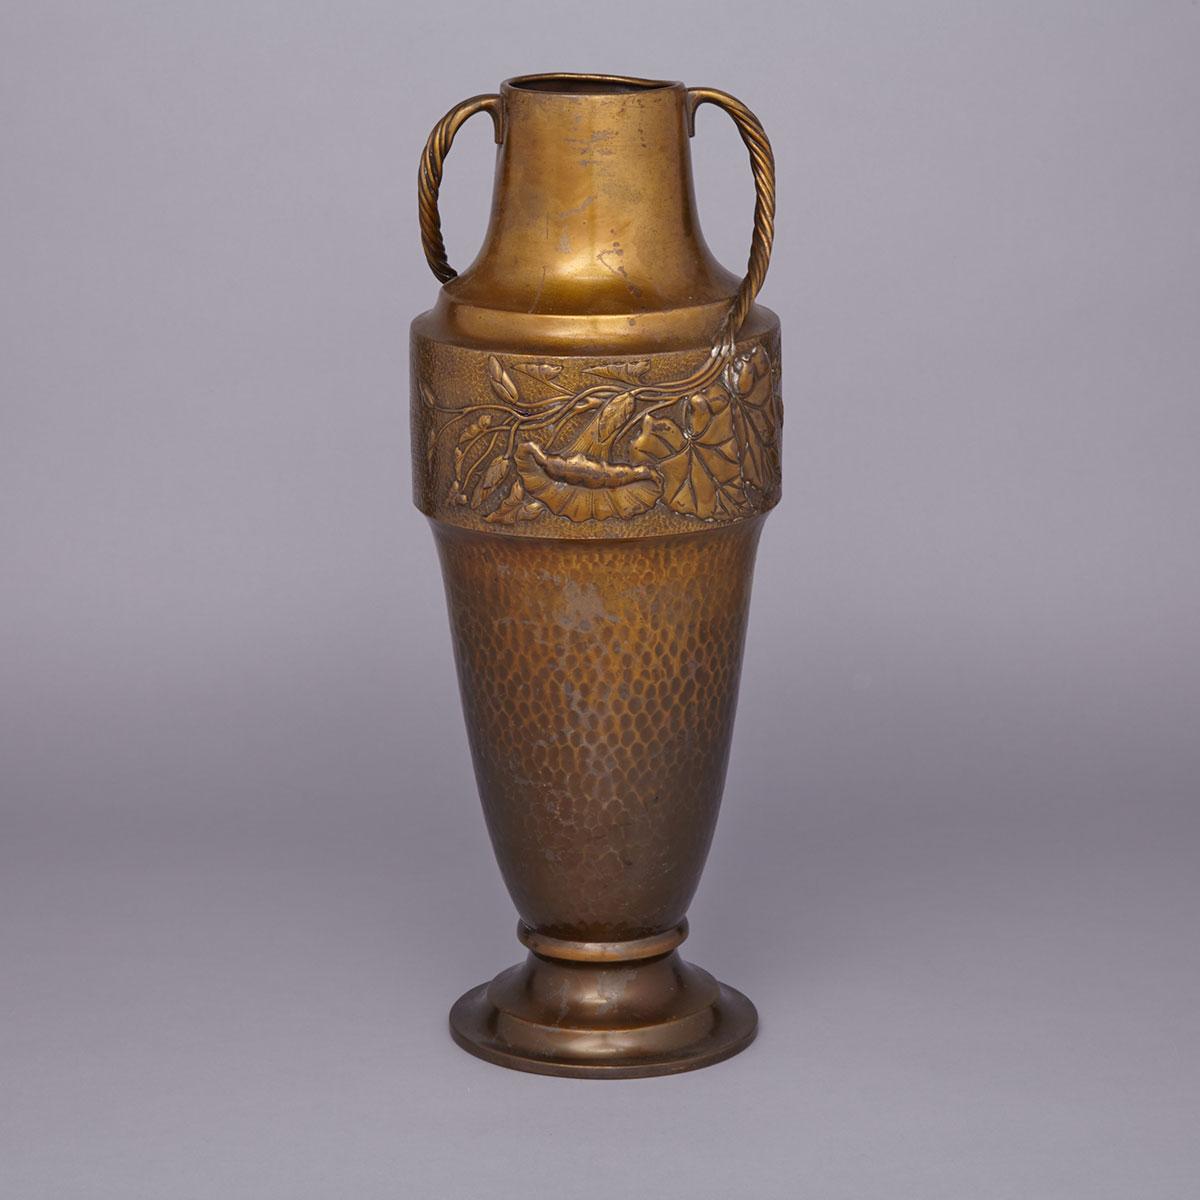 WMF Hammered and Repoussé Gilt and Lacquered Brass ‘Morning Glory’ Vase, c.1910